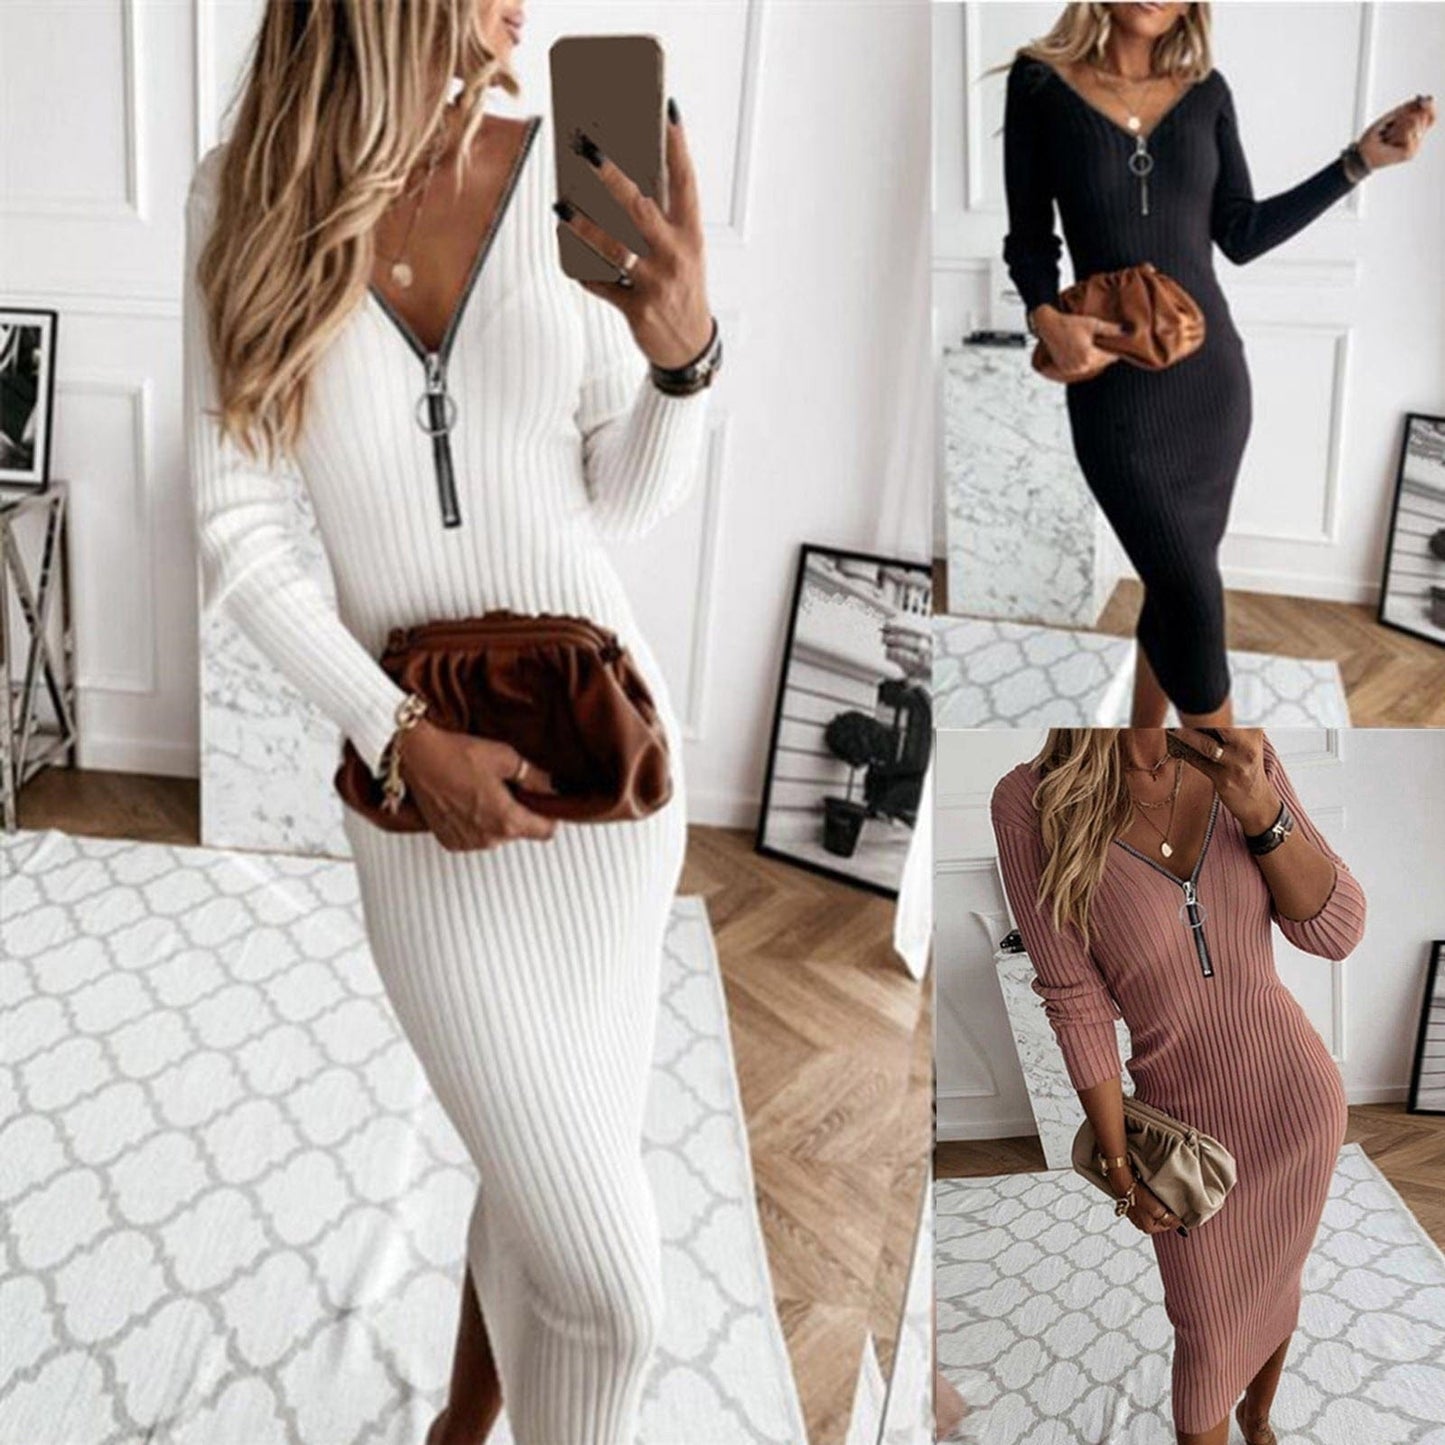 Autumn V-neck Fashion Casual Long Sleeve Party Bodycon Ribbed Knit Dress Women Autumn Winter Solid Slim Midi Women Sweater Dress - Dresses